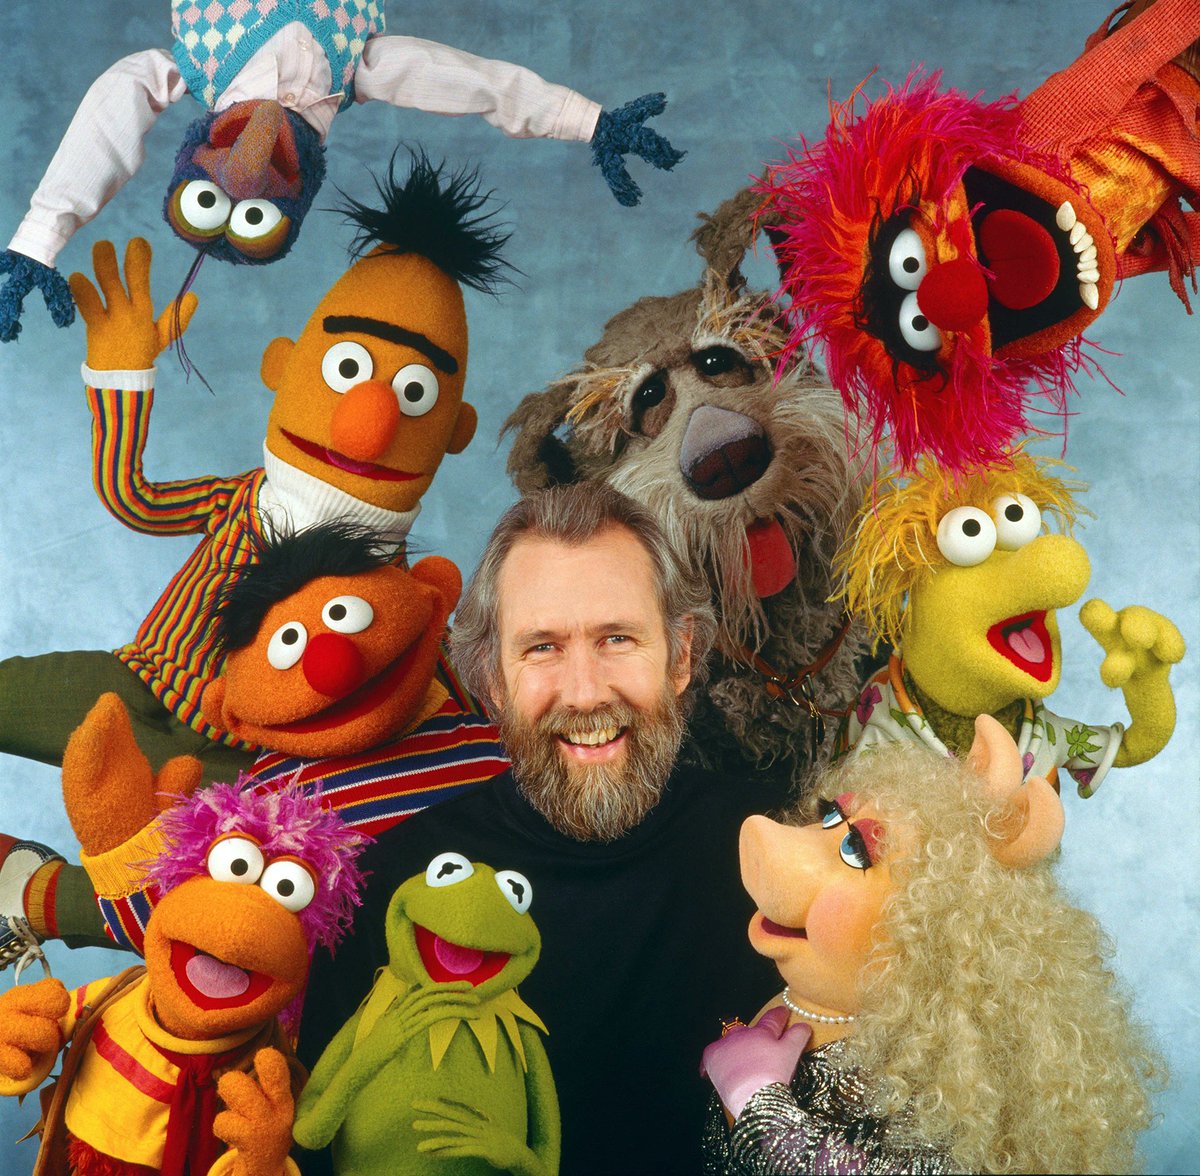 “Life's like a movie, write your own ending. Keep believing, keep pretending.”

🎬 #JimHenson, American puppeteer, artist, screenwriter, filmmaker, and creator of the #Muppets, #DOTD 16 May 1990. #Film #TV